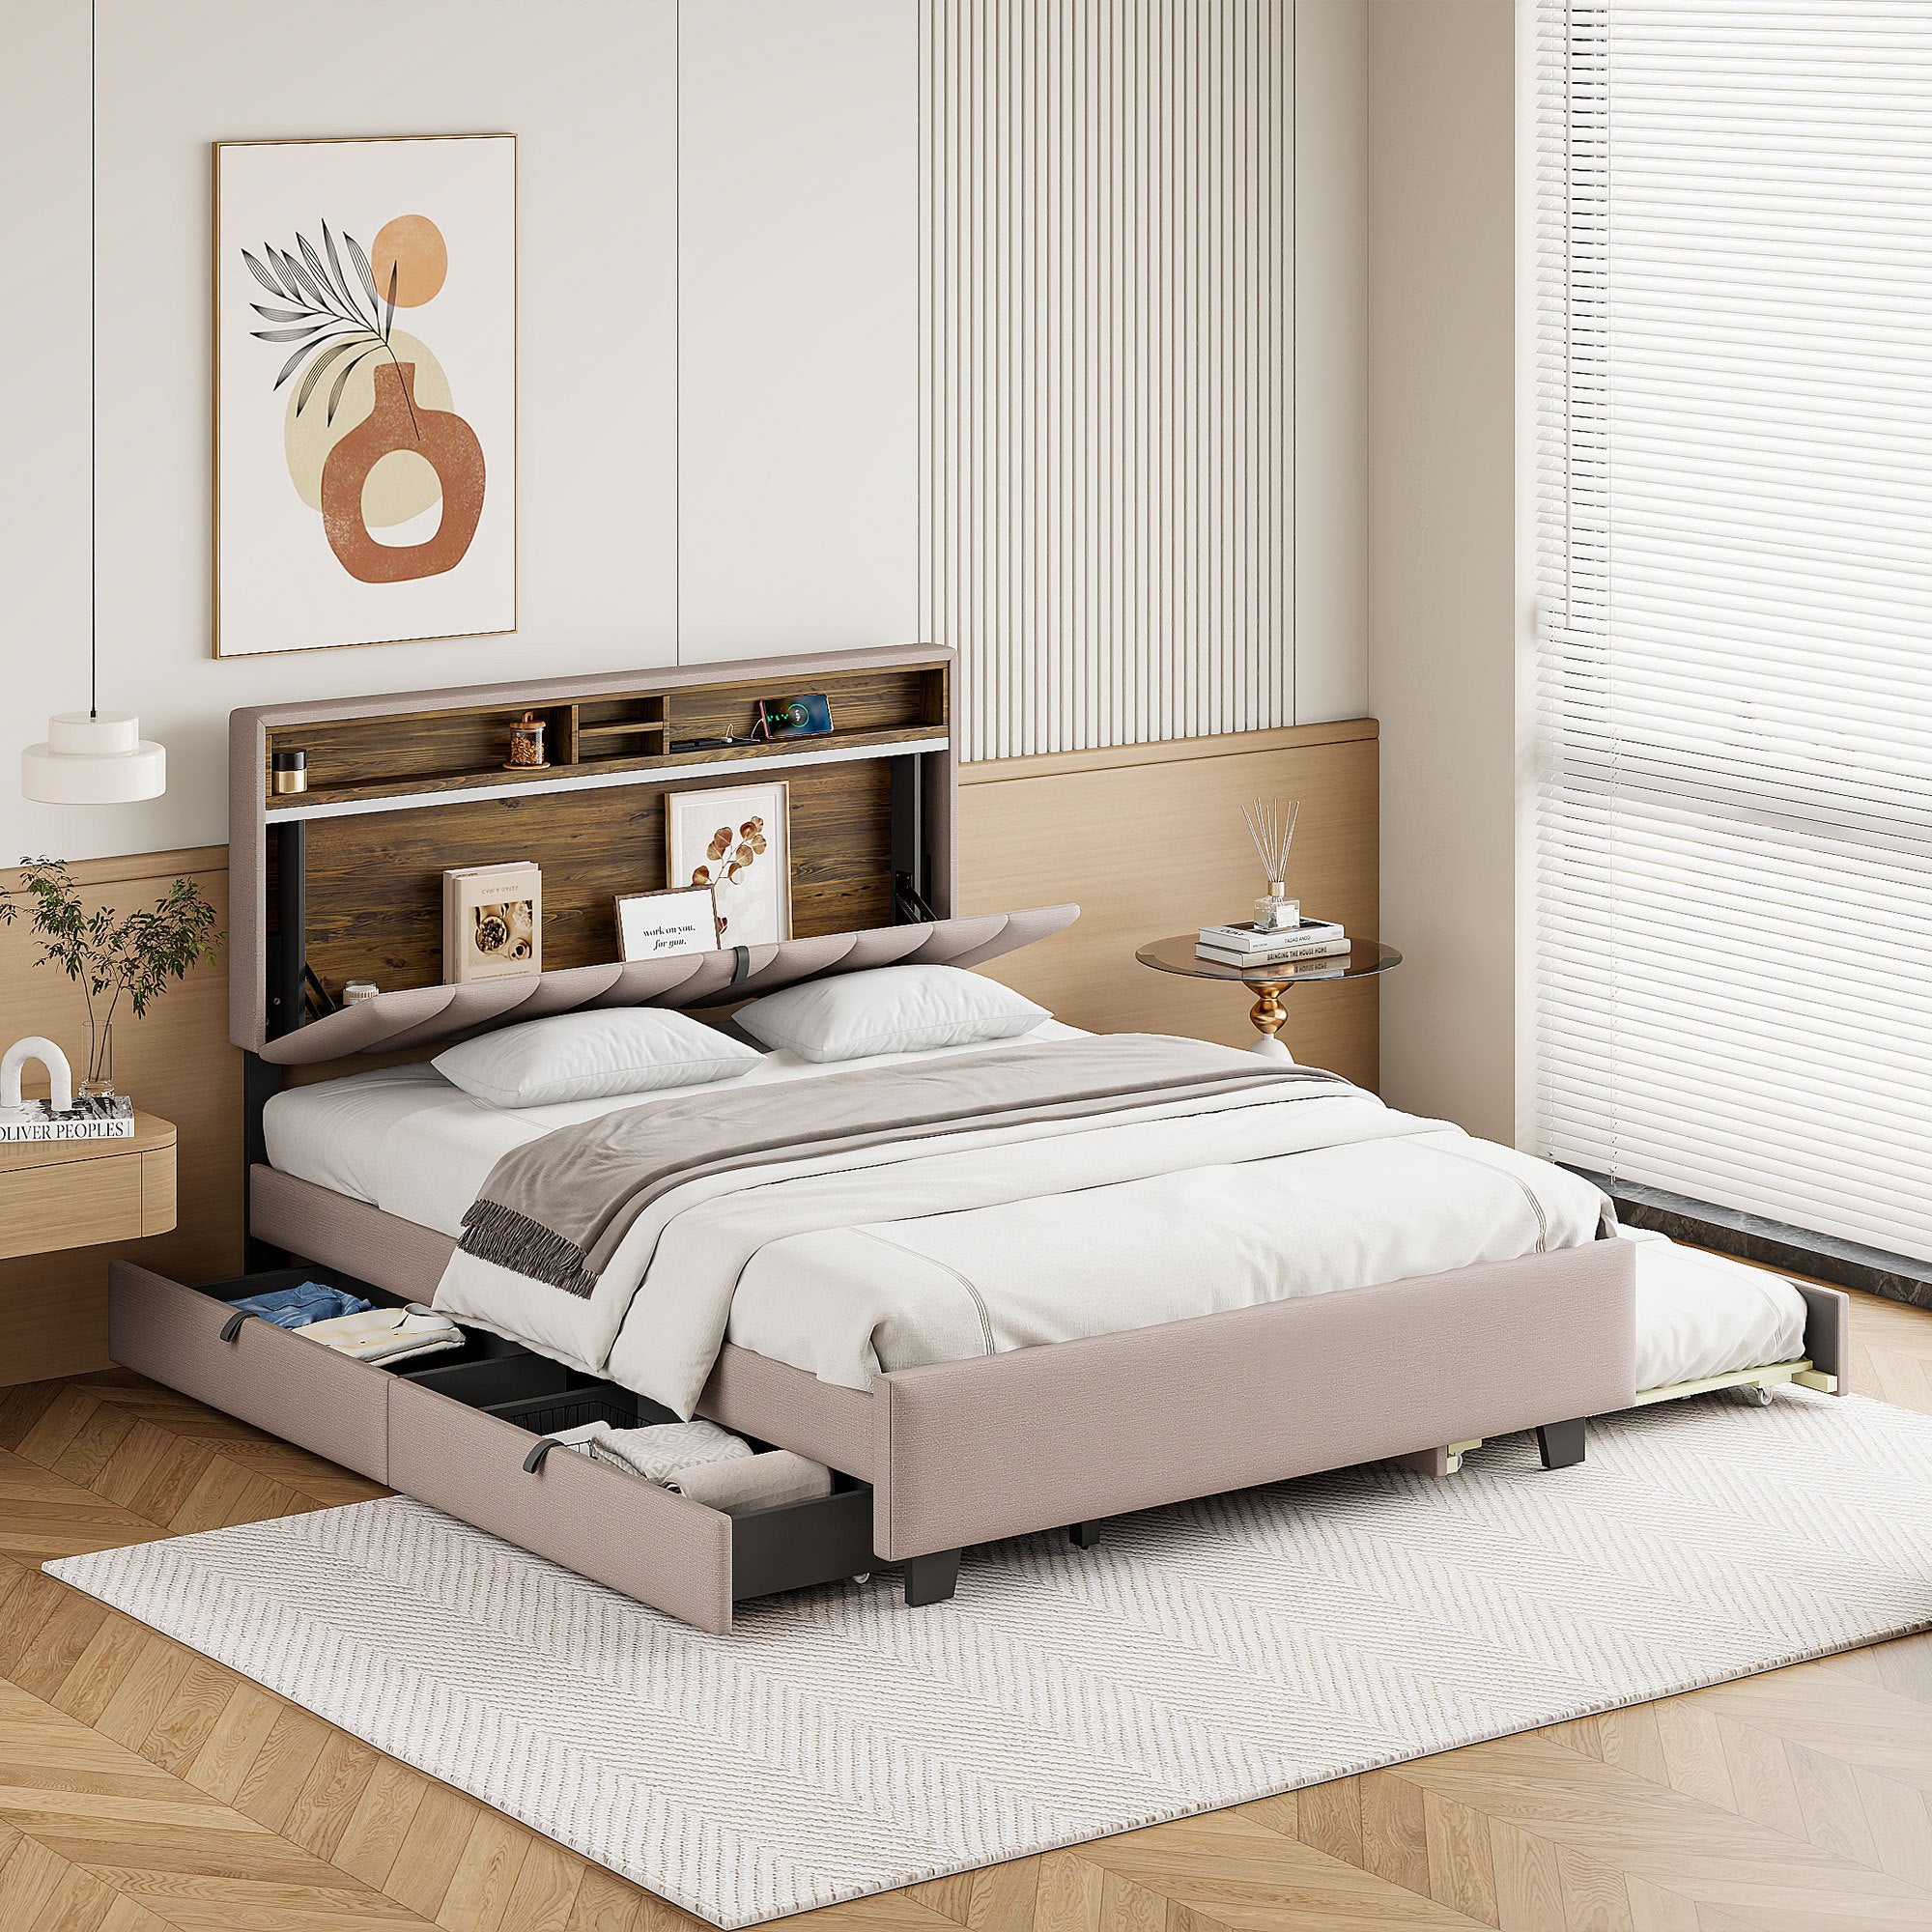 🆓🚛 Queen size Upholstered Platform Bed with Storage Headboard, Twin XL Size Trundle & 2 drawers and a set of Sockets & USB Ports, Linen Fabric, Beige